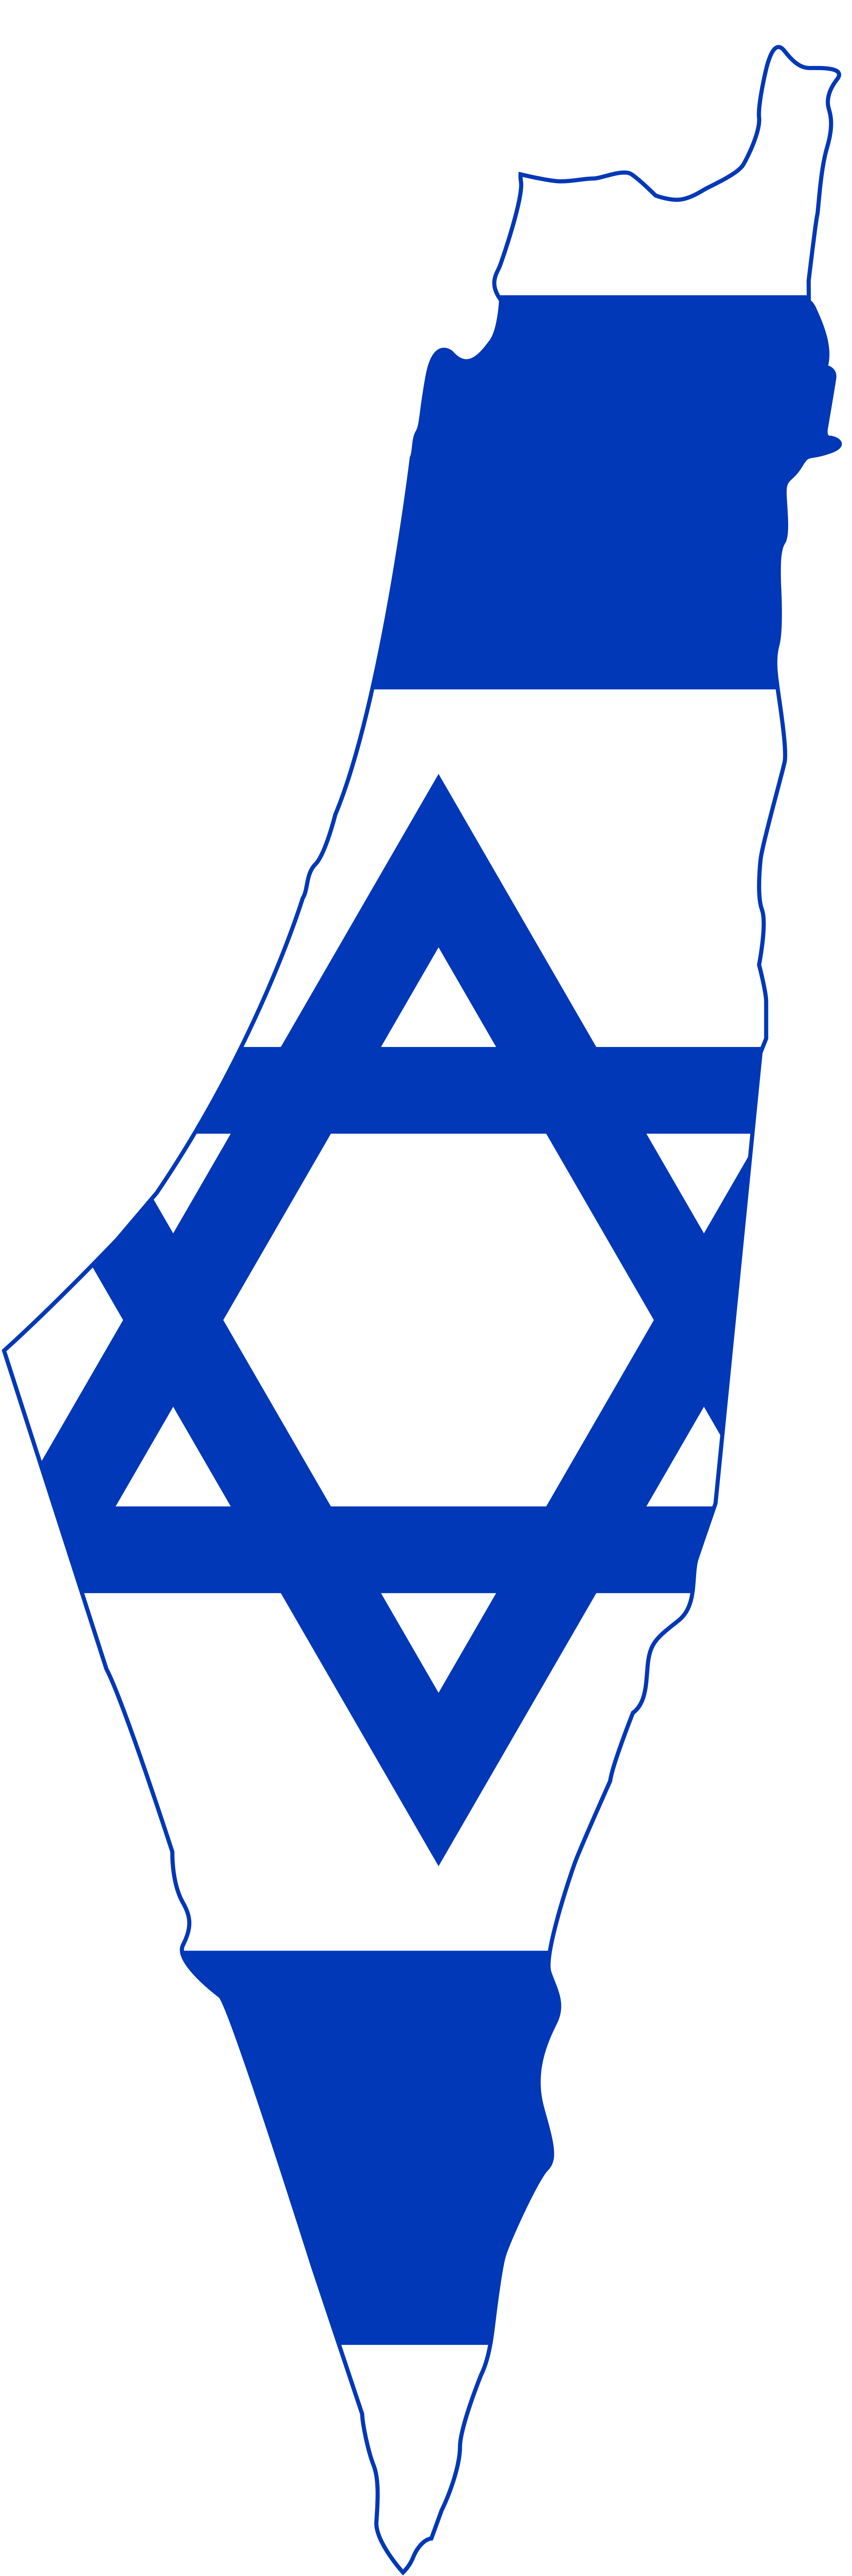 2000px-Flag_map_of_Israel_%28including_Palestinian_territories%29.svg.png